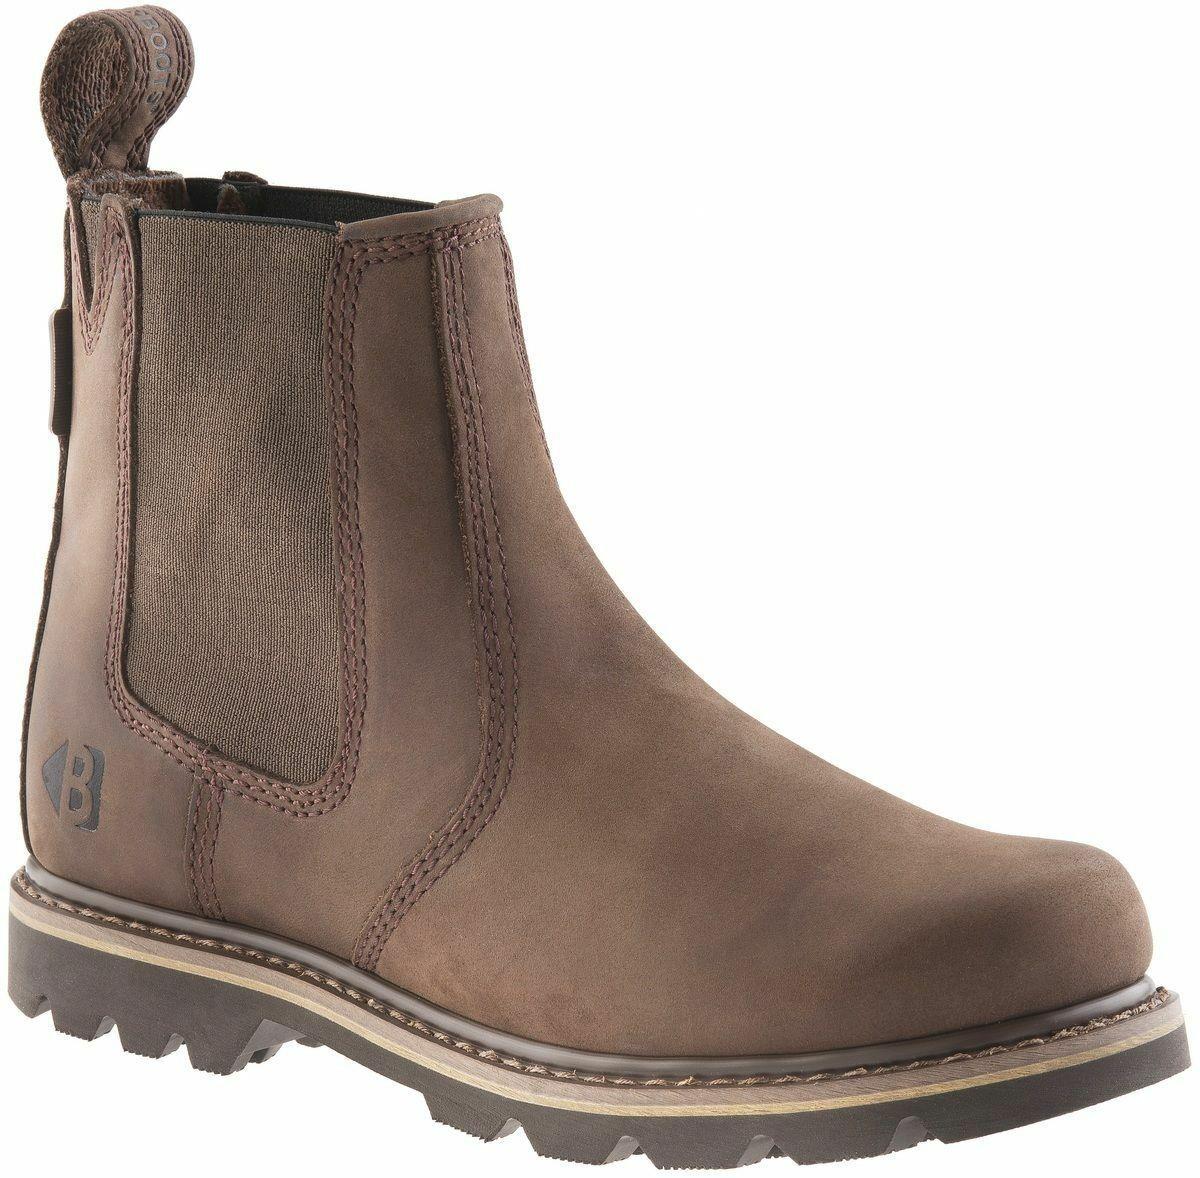 Buckbootz chocolate oily leather non-safety dealer boot #B1400